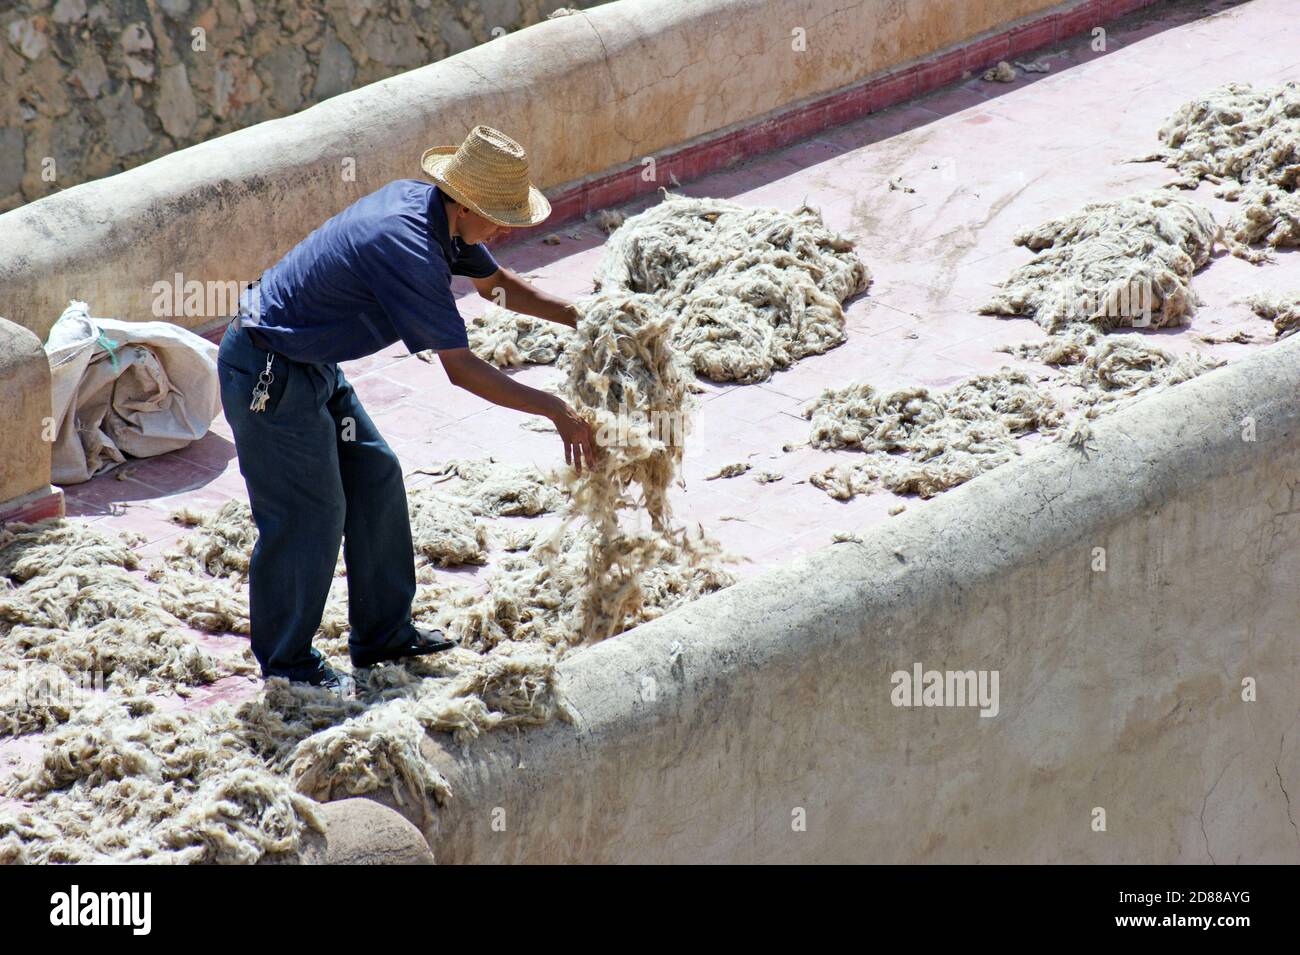 A Chouara tannery worker collects hair as part of the leather production process in the old medina of Fez, Morocco, Africa. Stock Photo